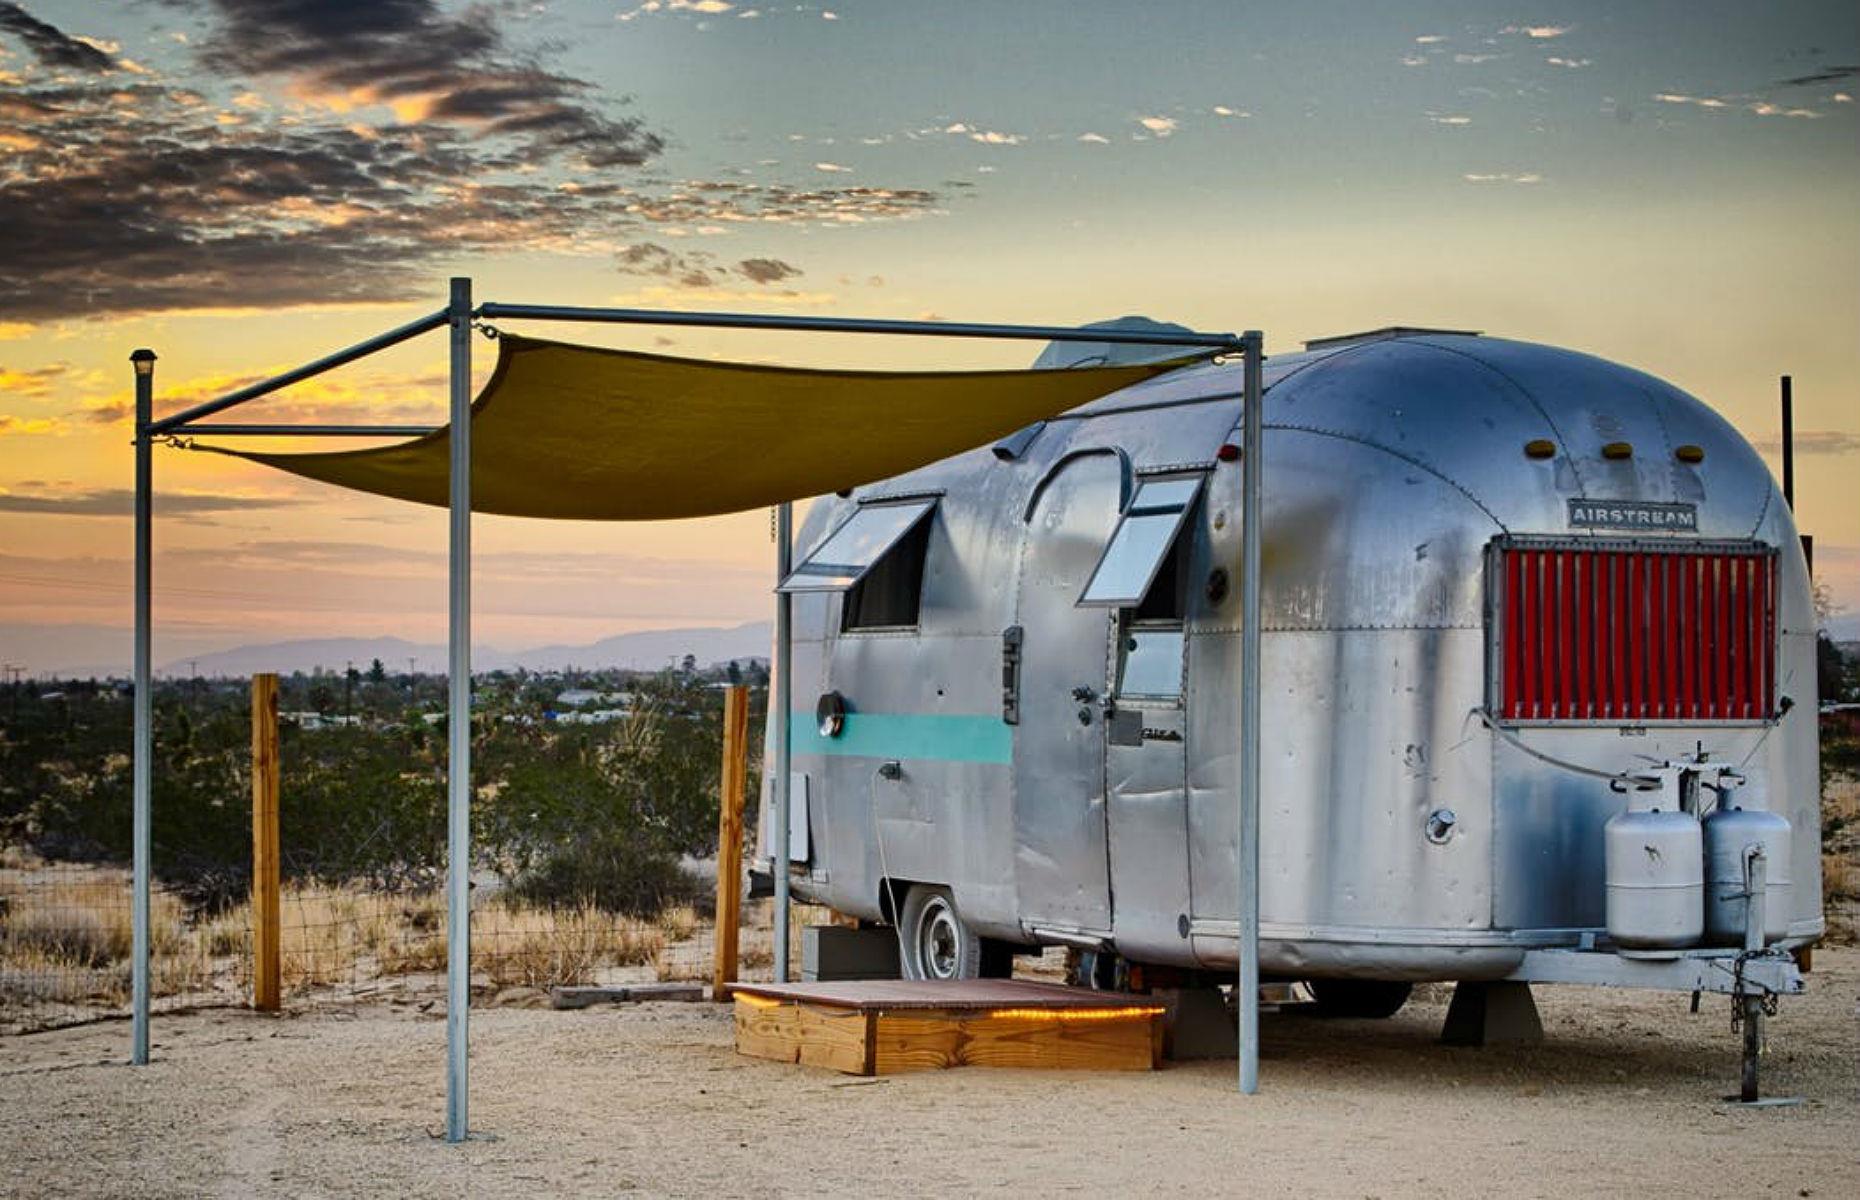 <p>This cute <a href="https://www.coolstays.com/property/kates-lazy-desert-airstreams/16867">Tiki Airstream</a> is 26 feet long and has one full bed, a bathroom and a small kitchenette. The overhauled Airstream has been designed to keep its owners cozy and comfortable, with air conditioning fitted for the warmer months and a space heater for winter. </p>